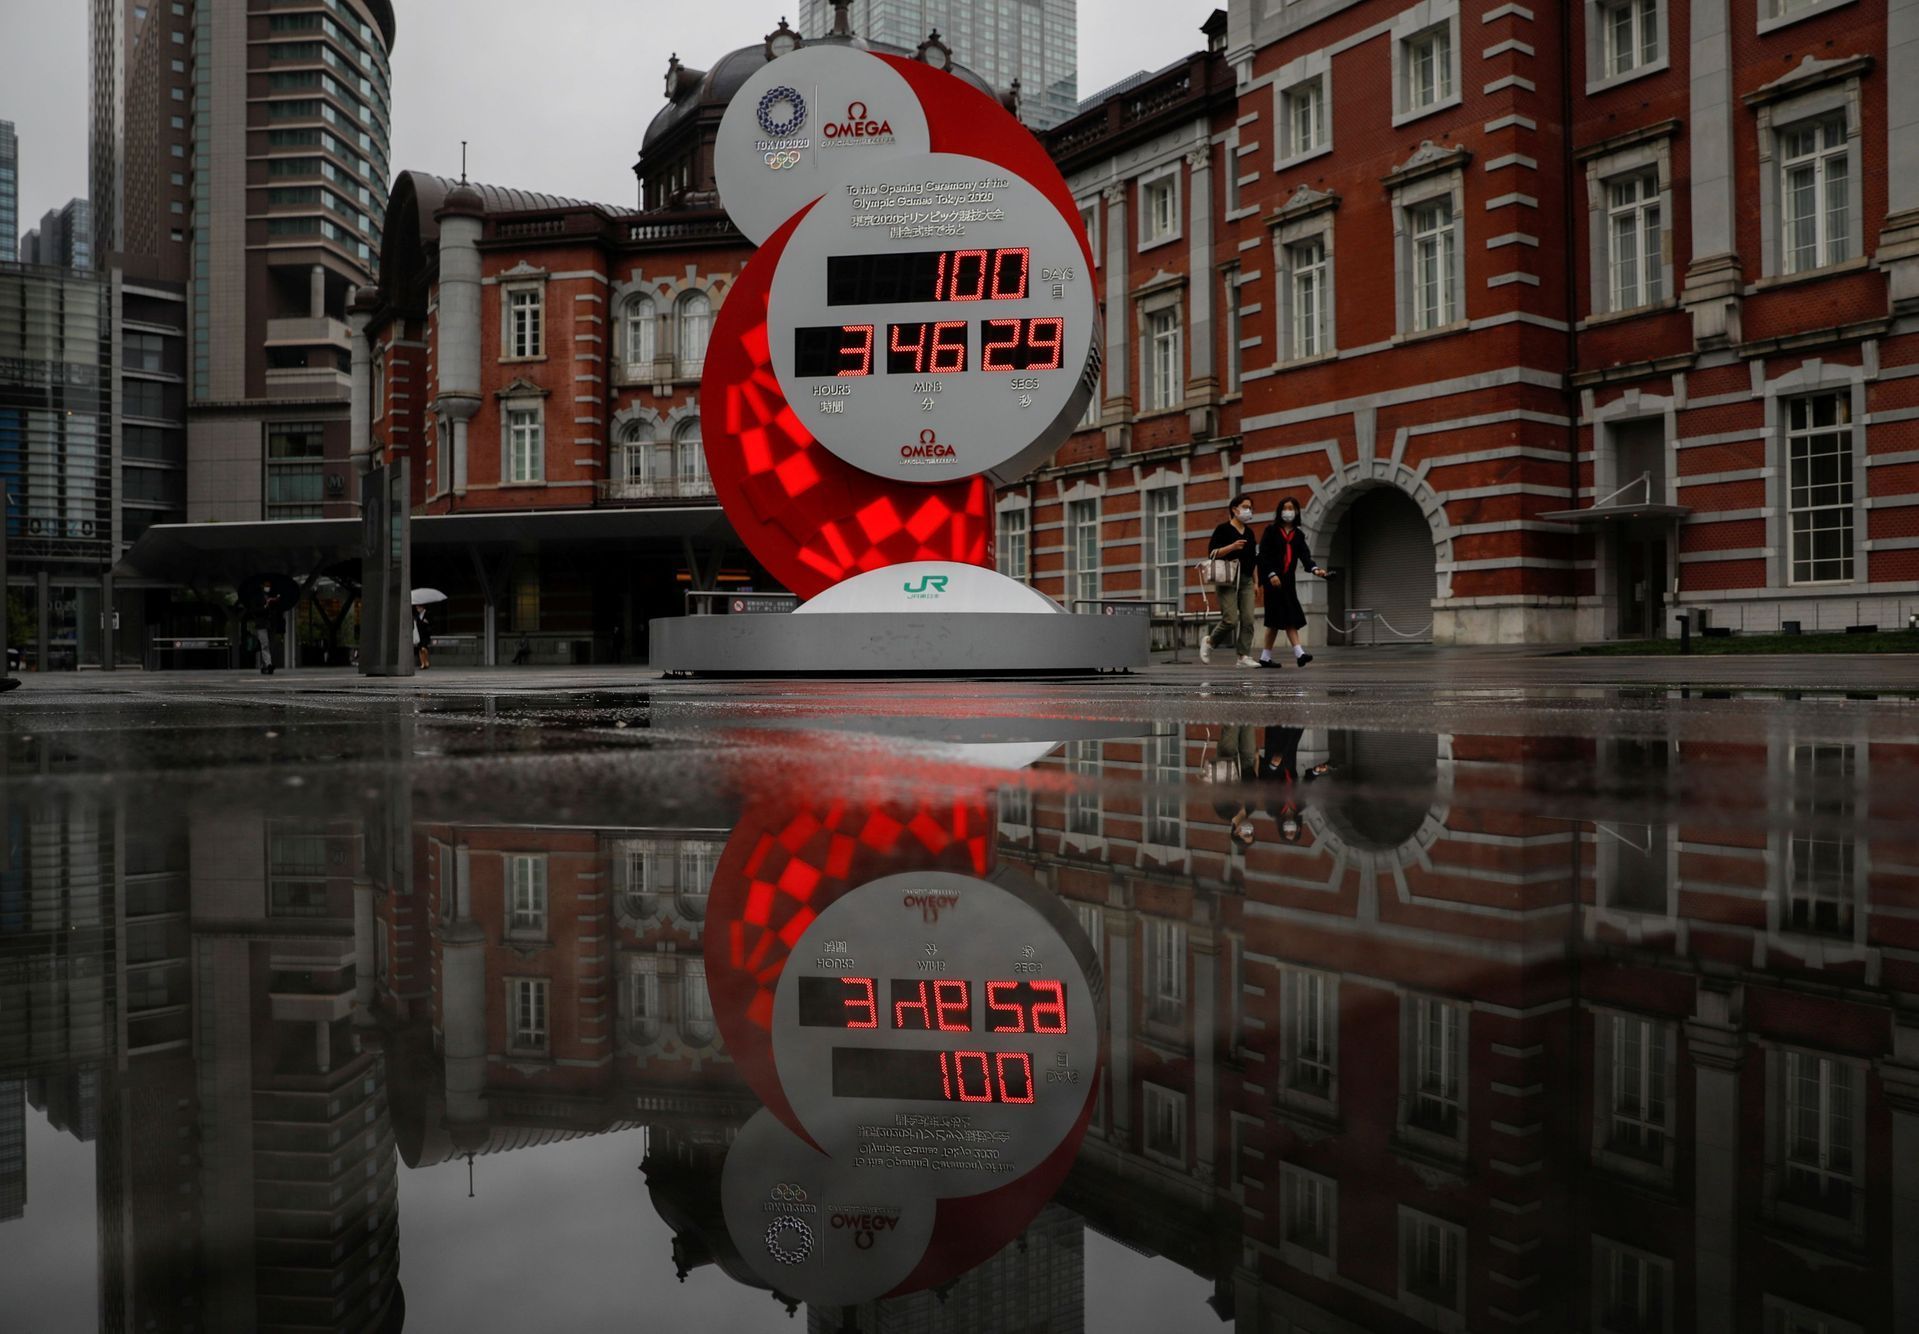 A countdown clock showing that 100 days are left until Tokyo 2020 Olympic Games is reflected in a puddle in Tokyo